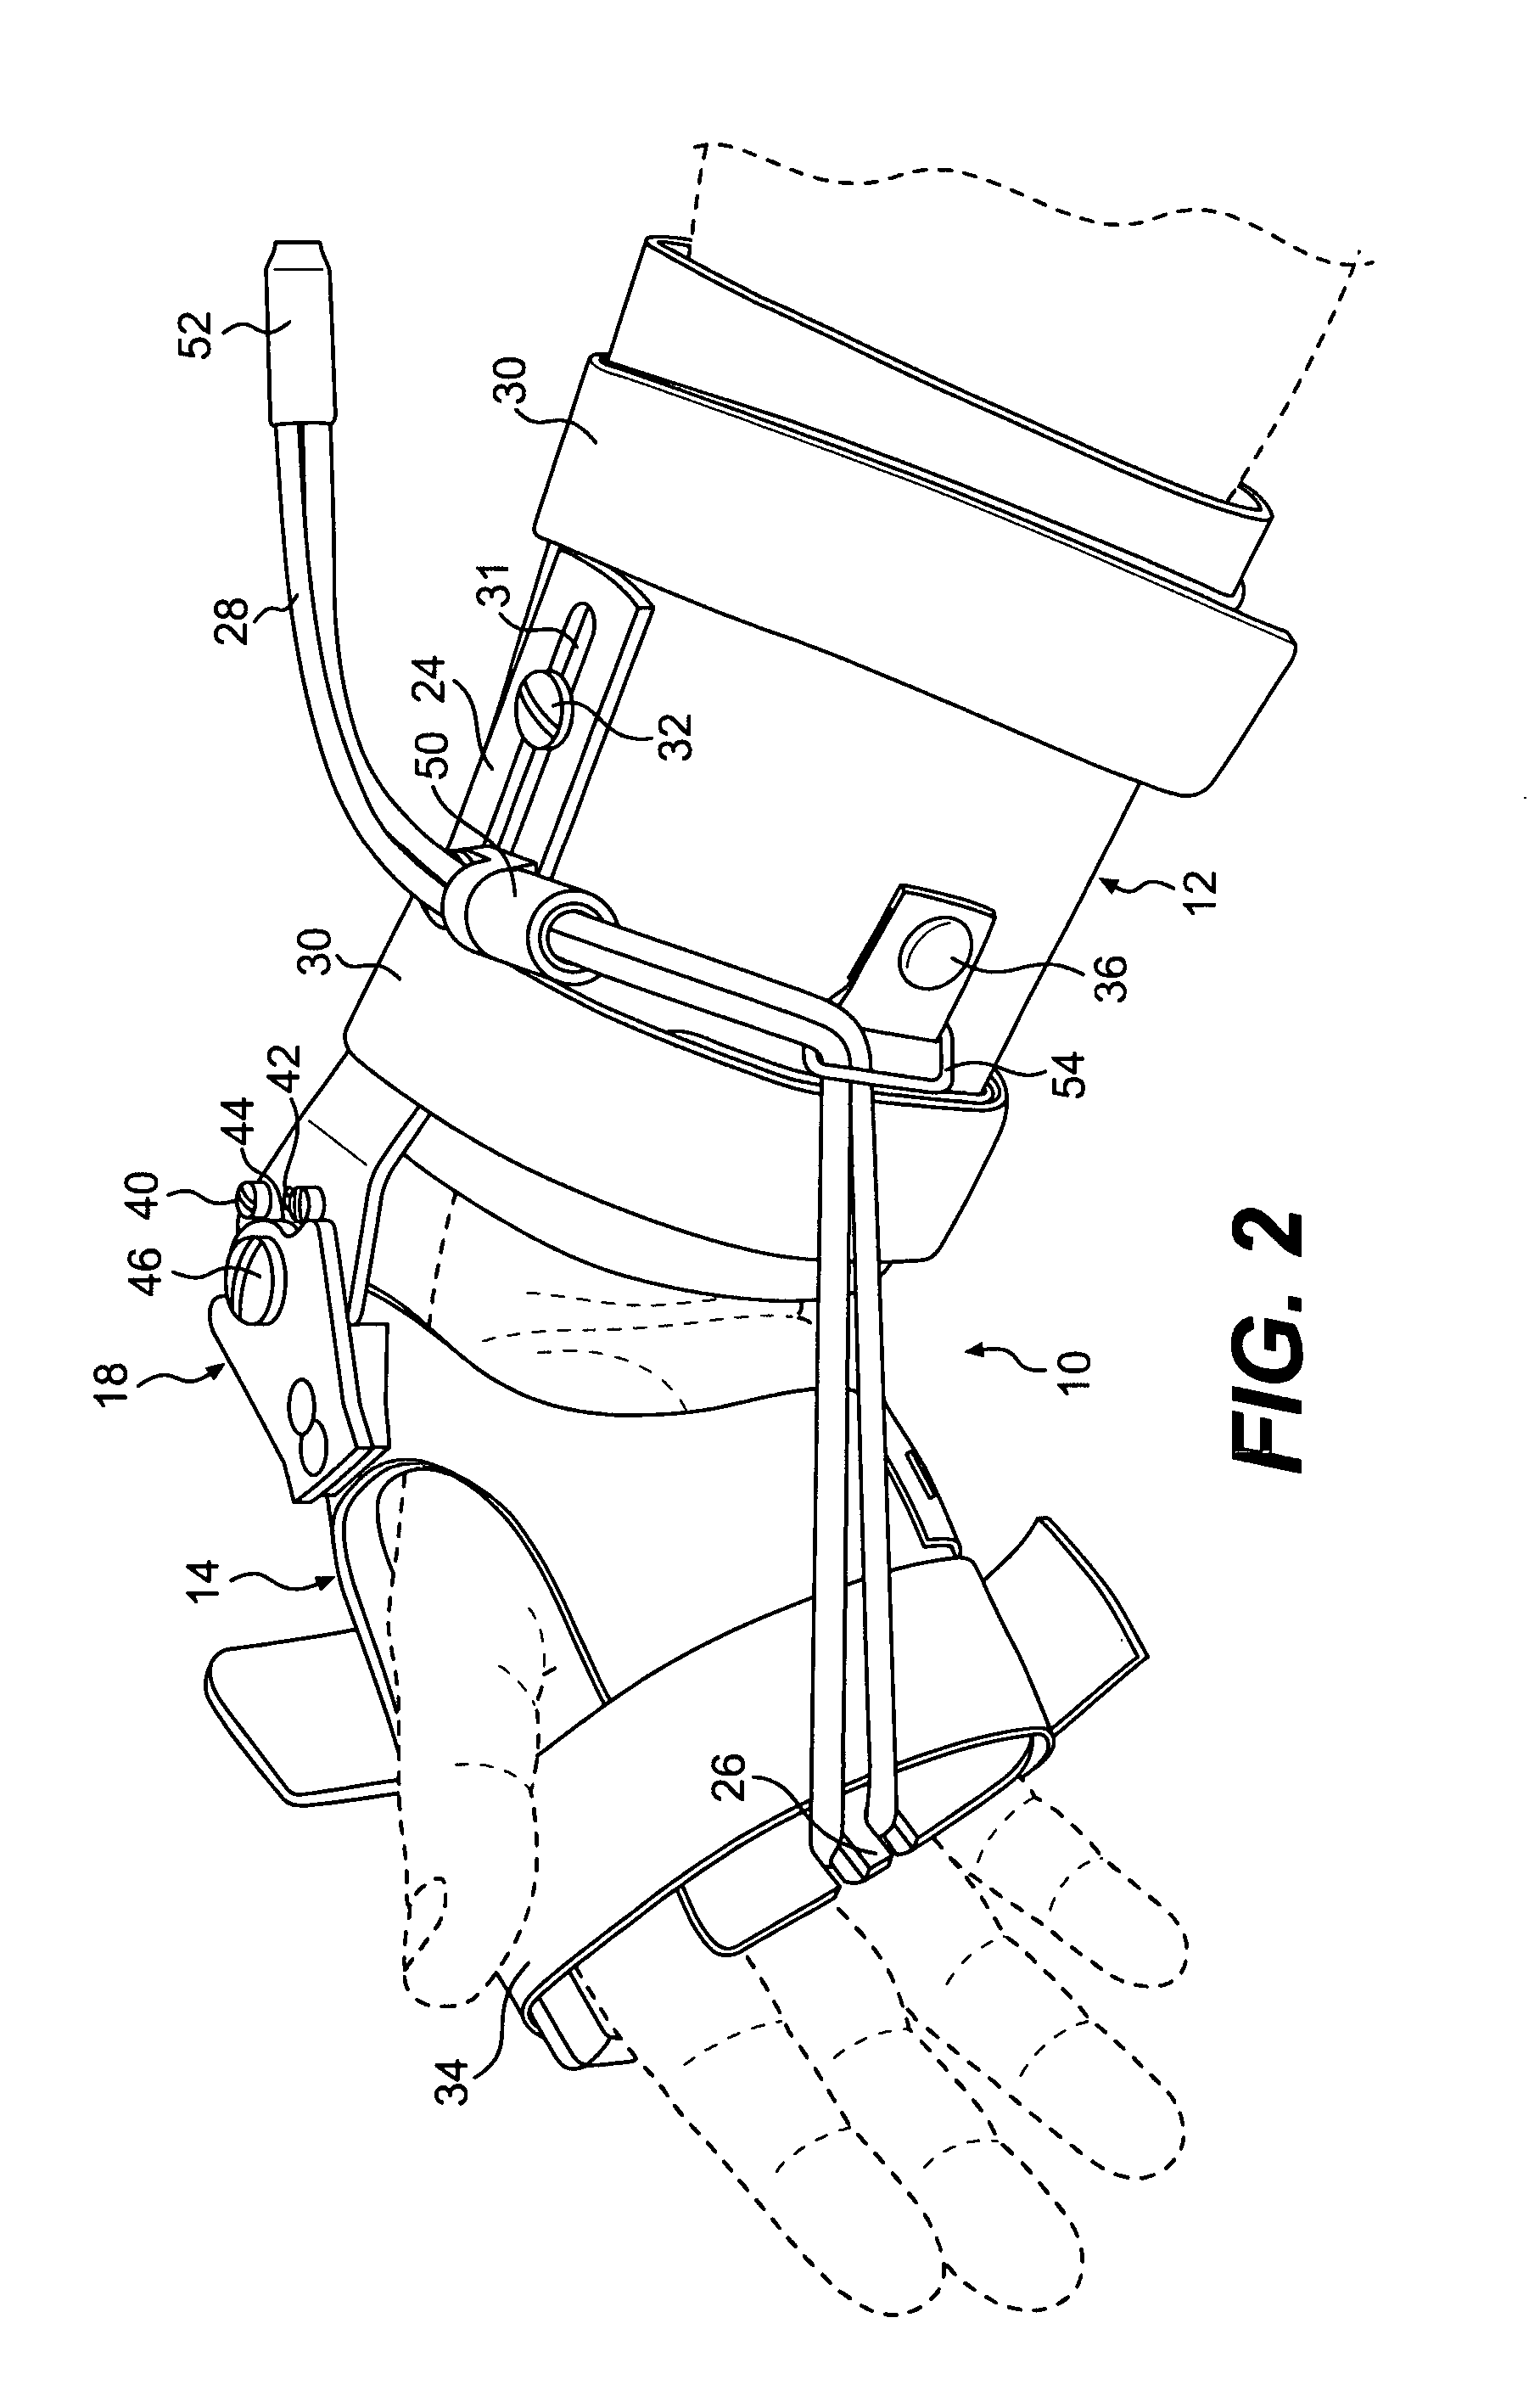 Flexion and extension device